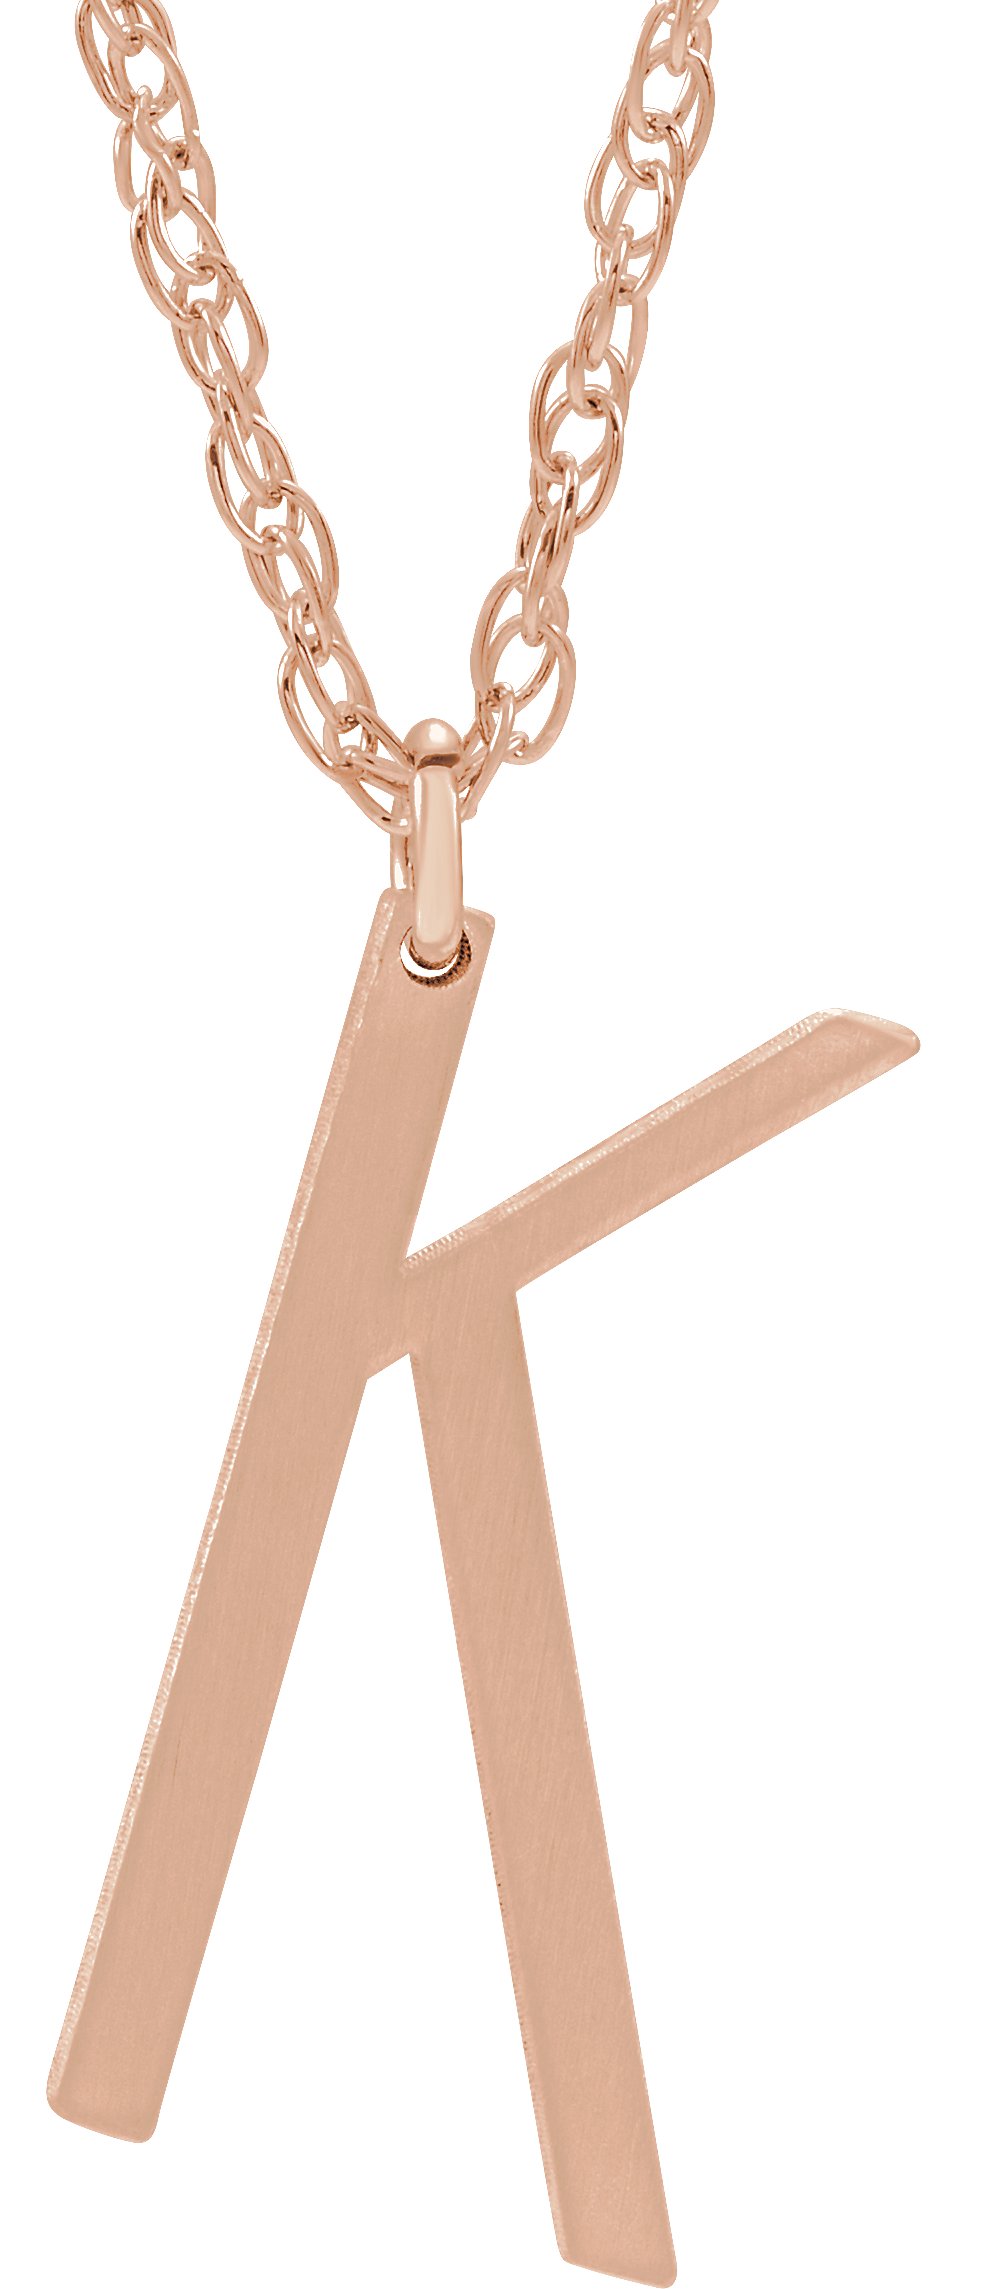 14K Rose Gold-Plated Sterling Silver Block Initial K 16-18" Necklace with Brush Finish